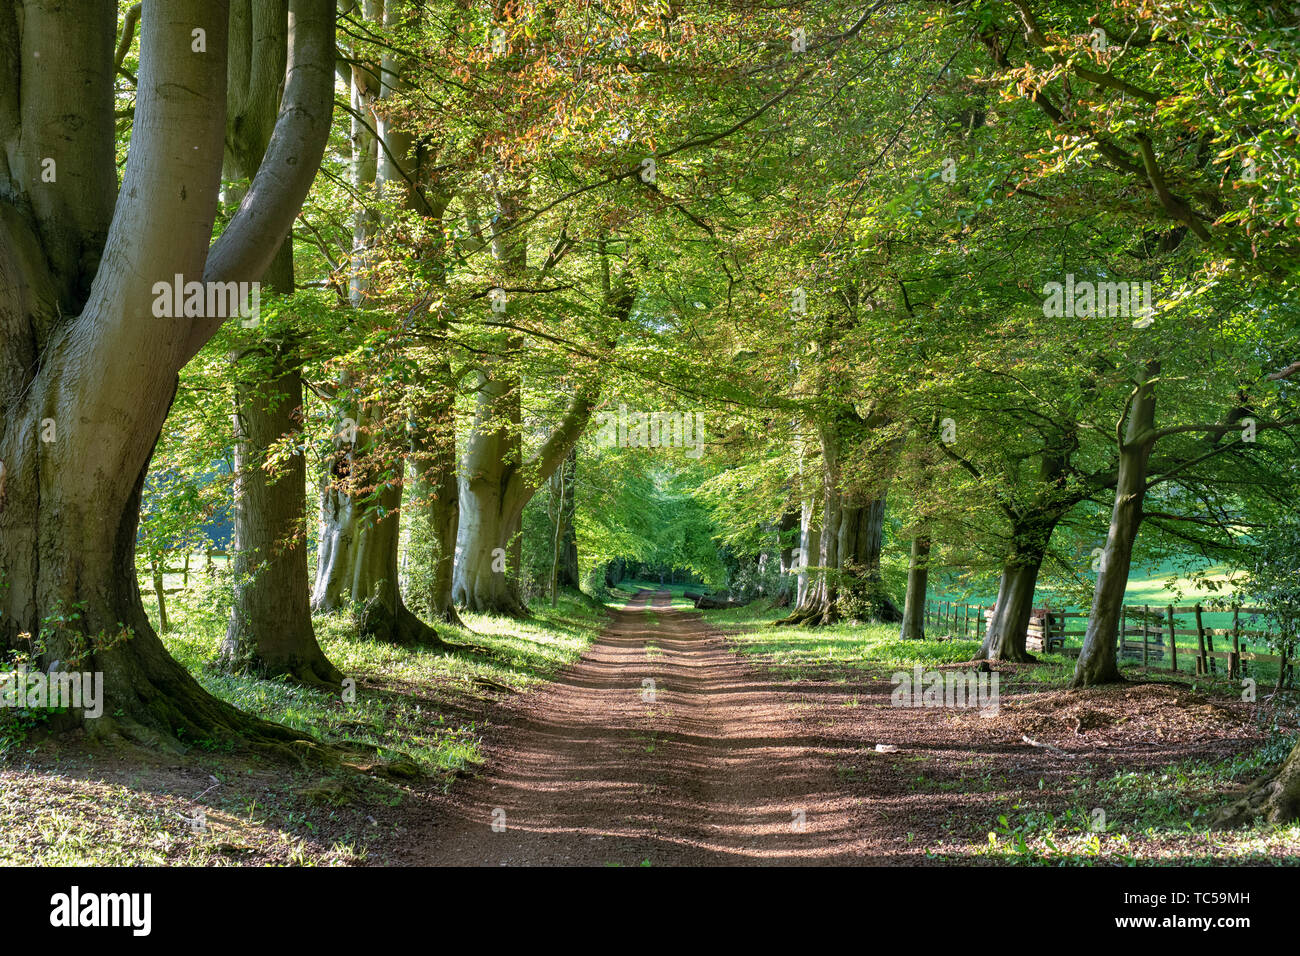 Fagus sylvatica. Beech trees along a track in spring. Swerford, Cotswolds, Oxfordshire, England Stock Photo